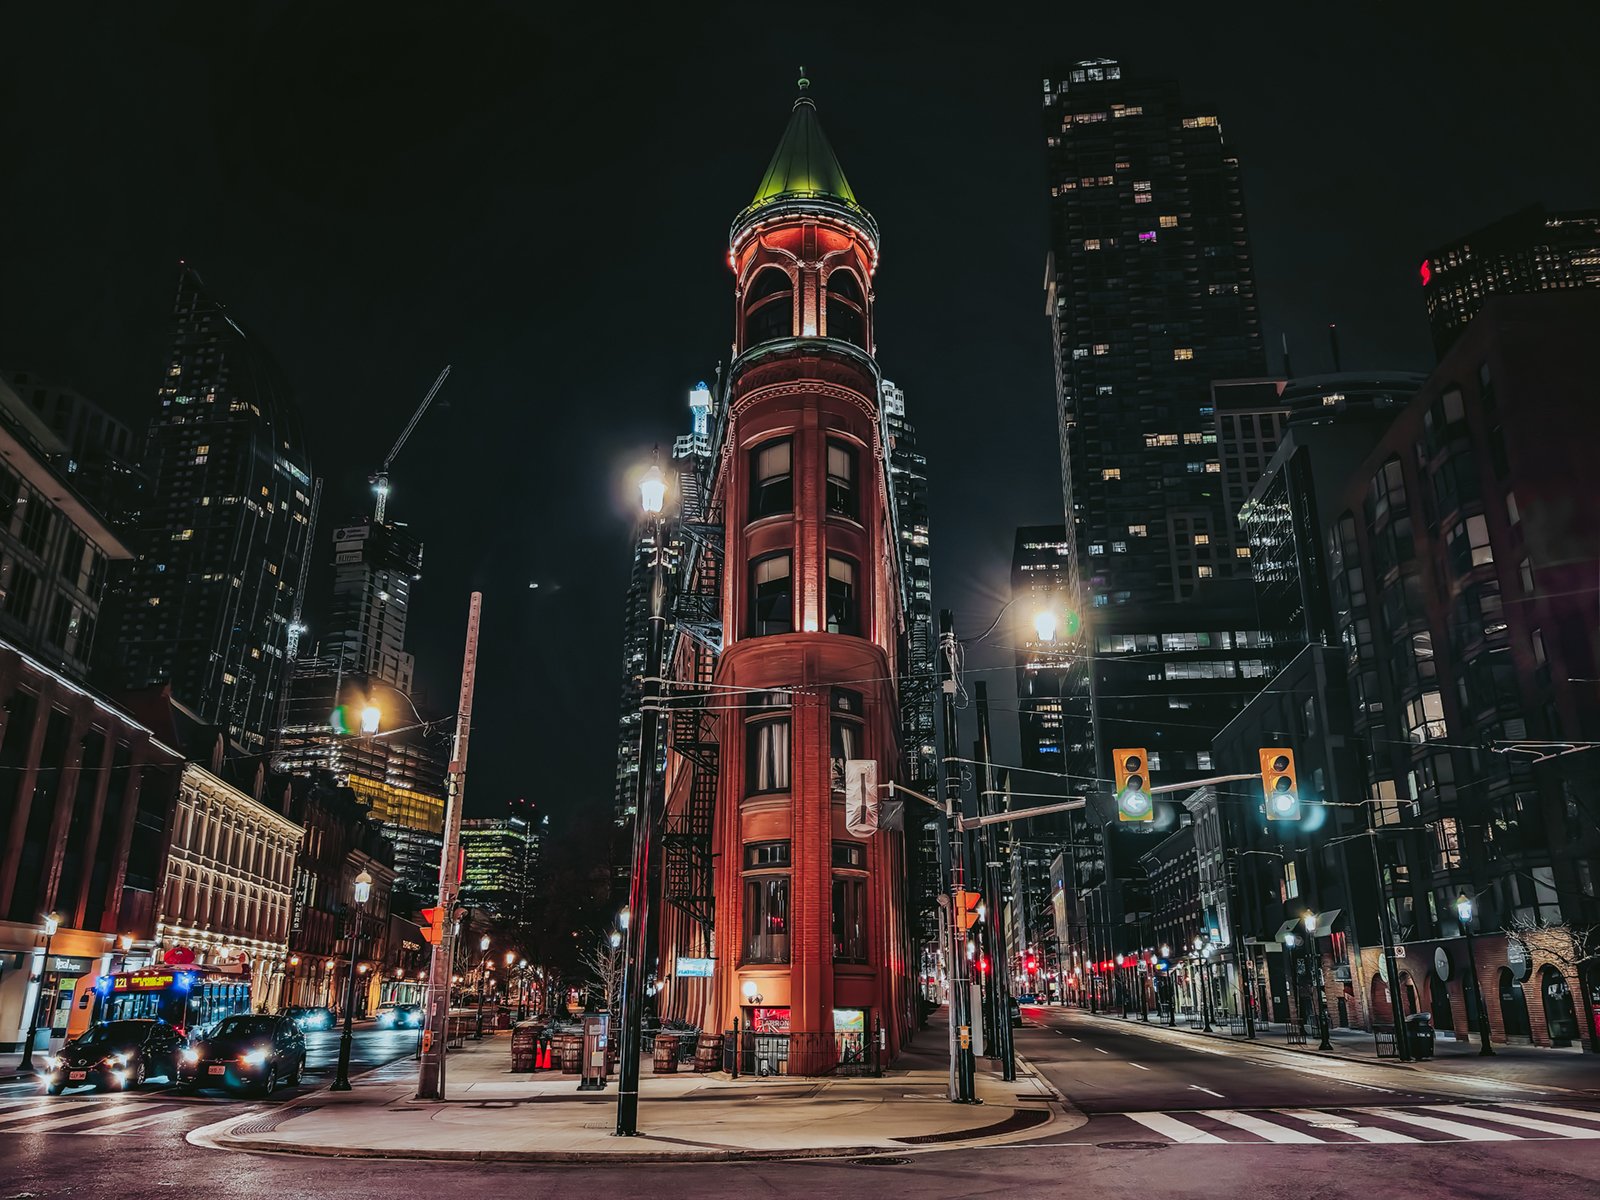 A nighttime view of the historic gooderham building in toronto, showing its distinctive flatiron shape and red brick facade, illuminated by street lights with modern skyscrapers in the background.